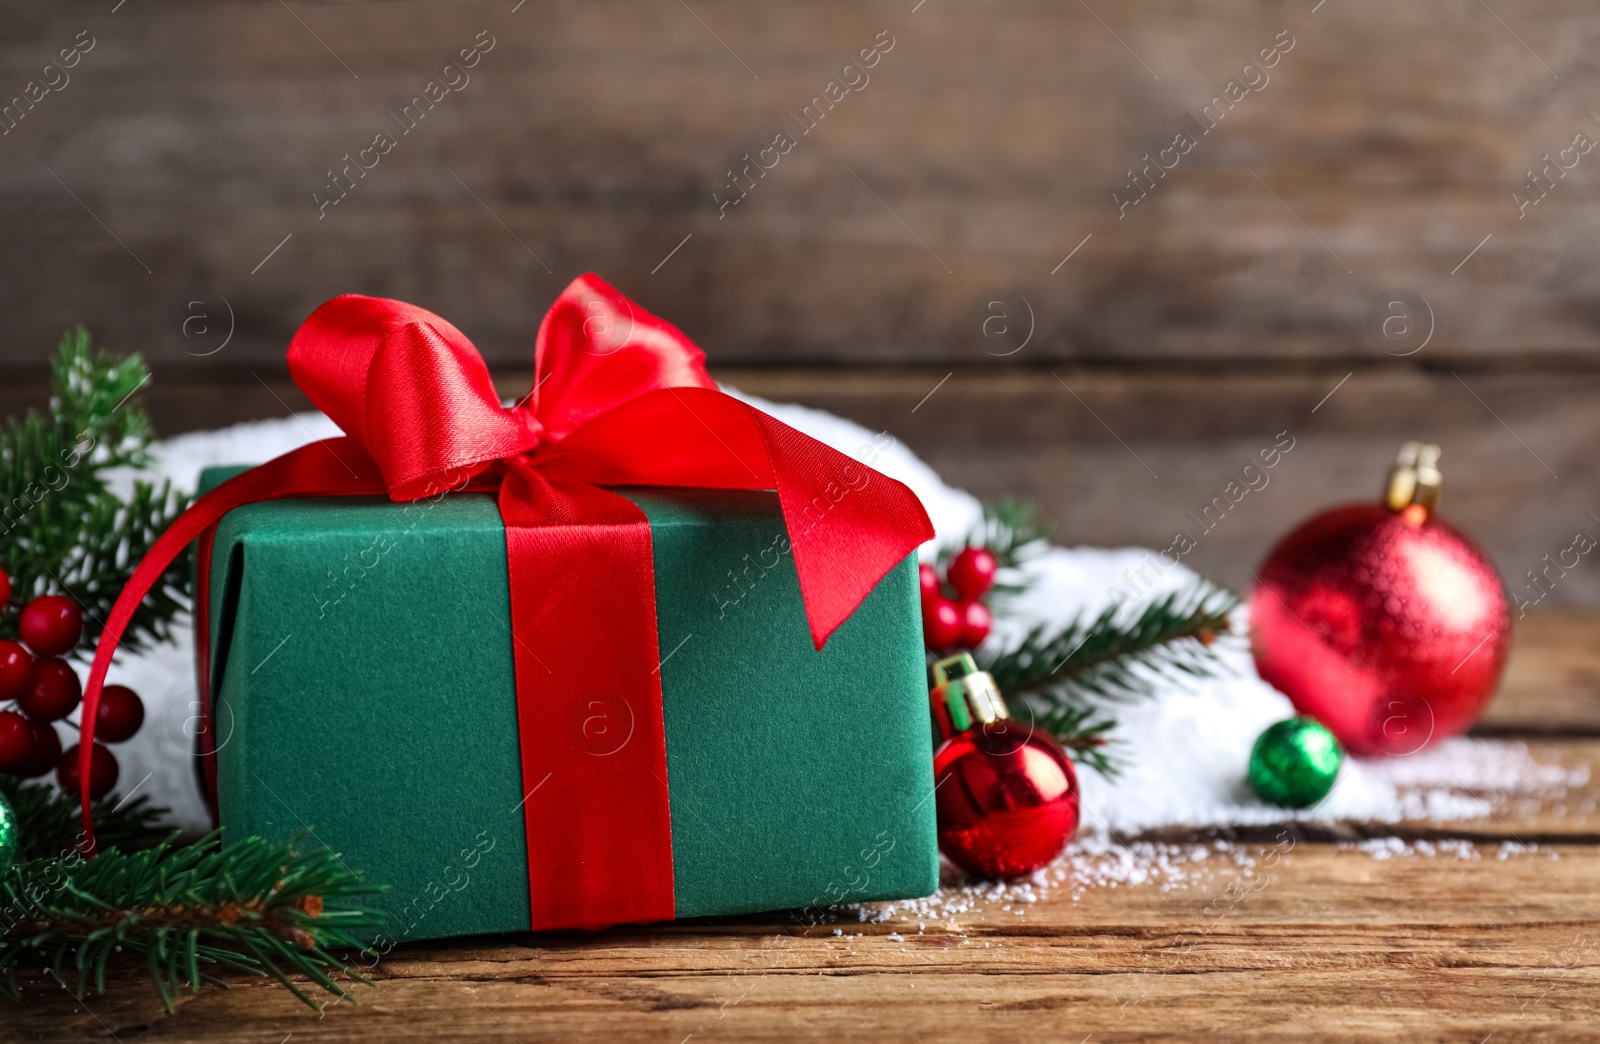 Photo of Christmas gift box with red bow and festive decor on wooden table, closeup